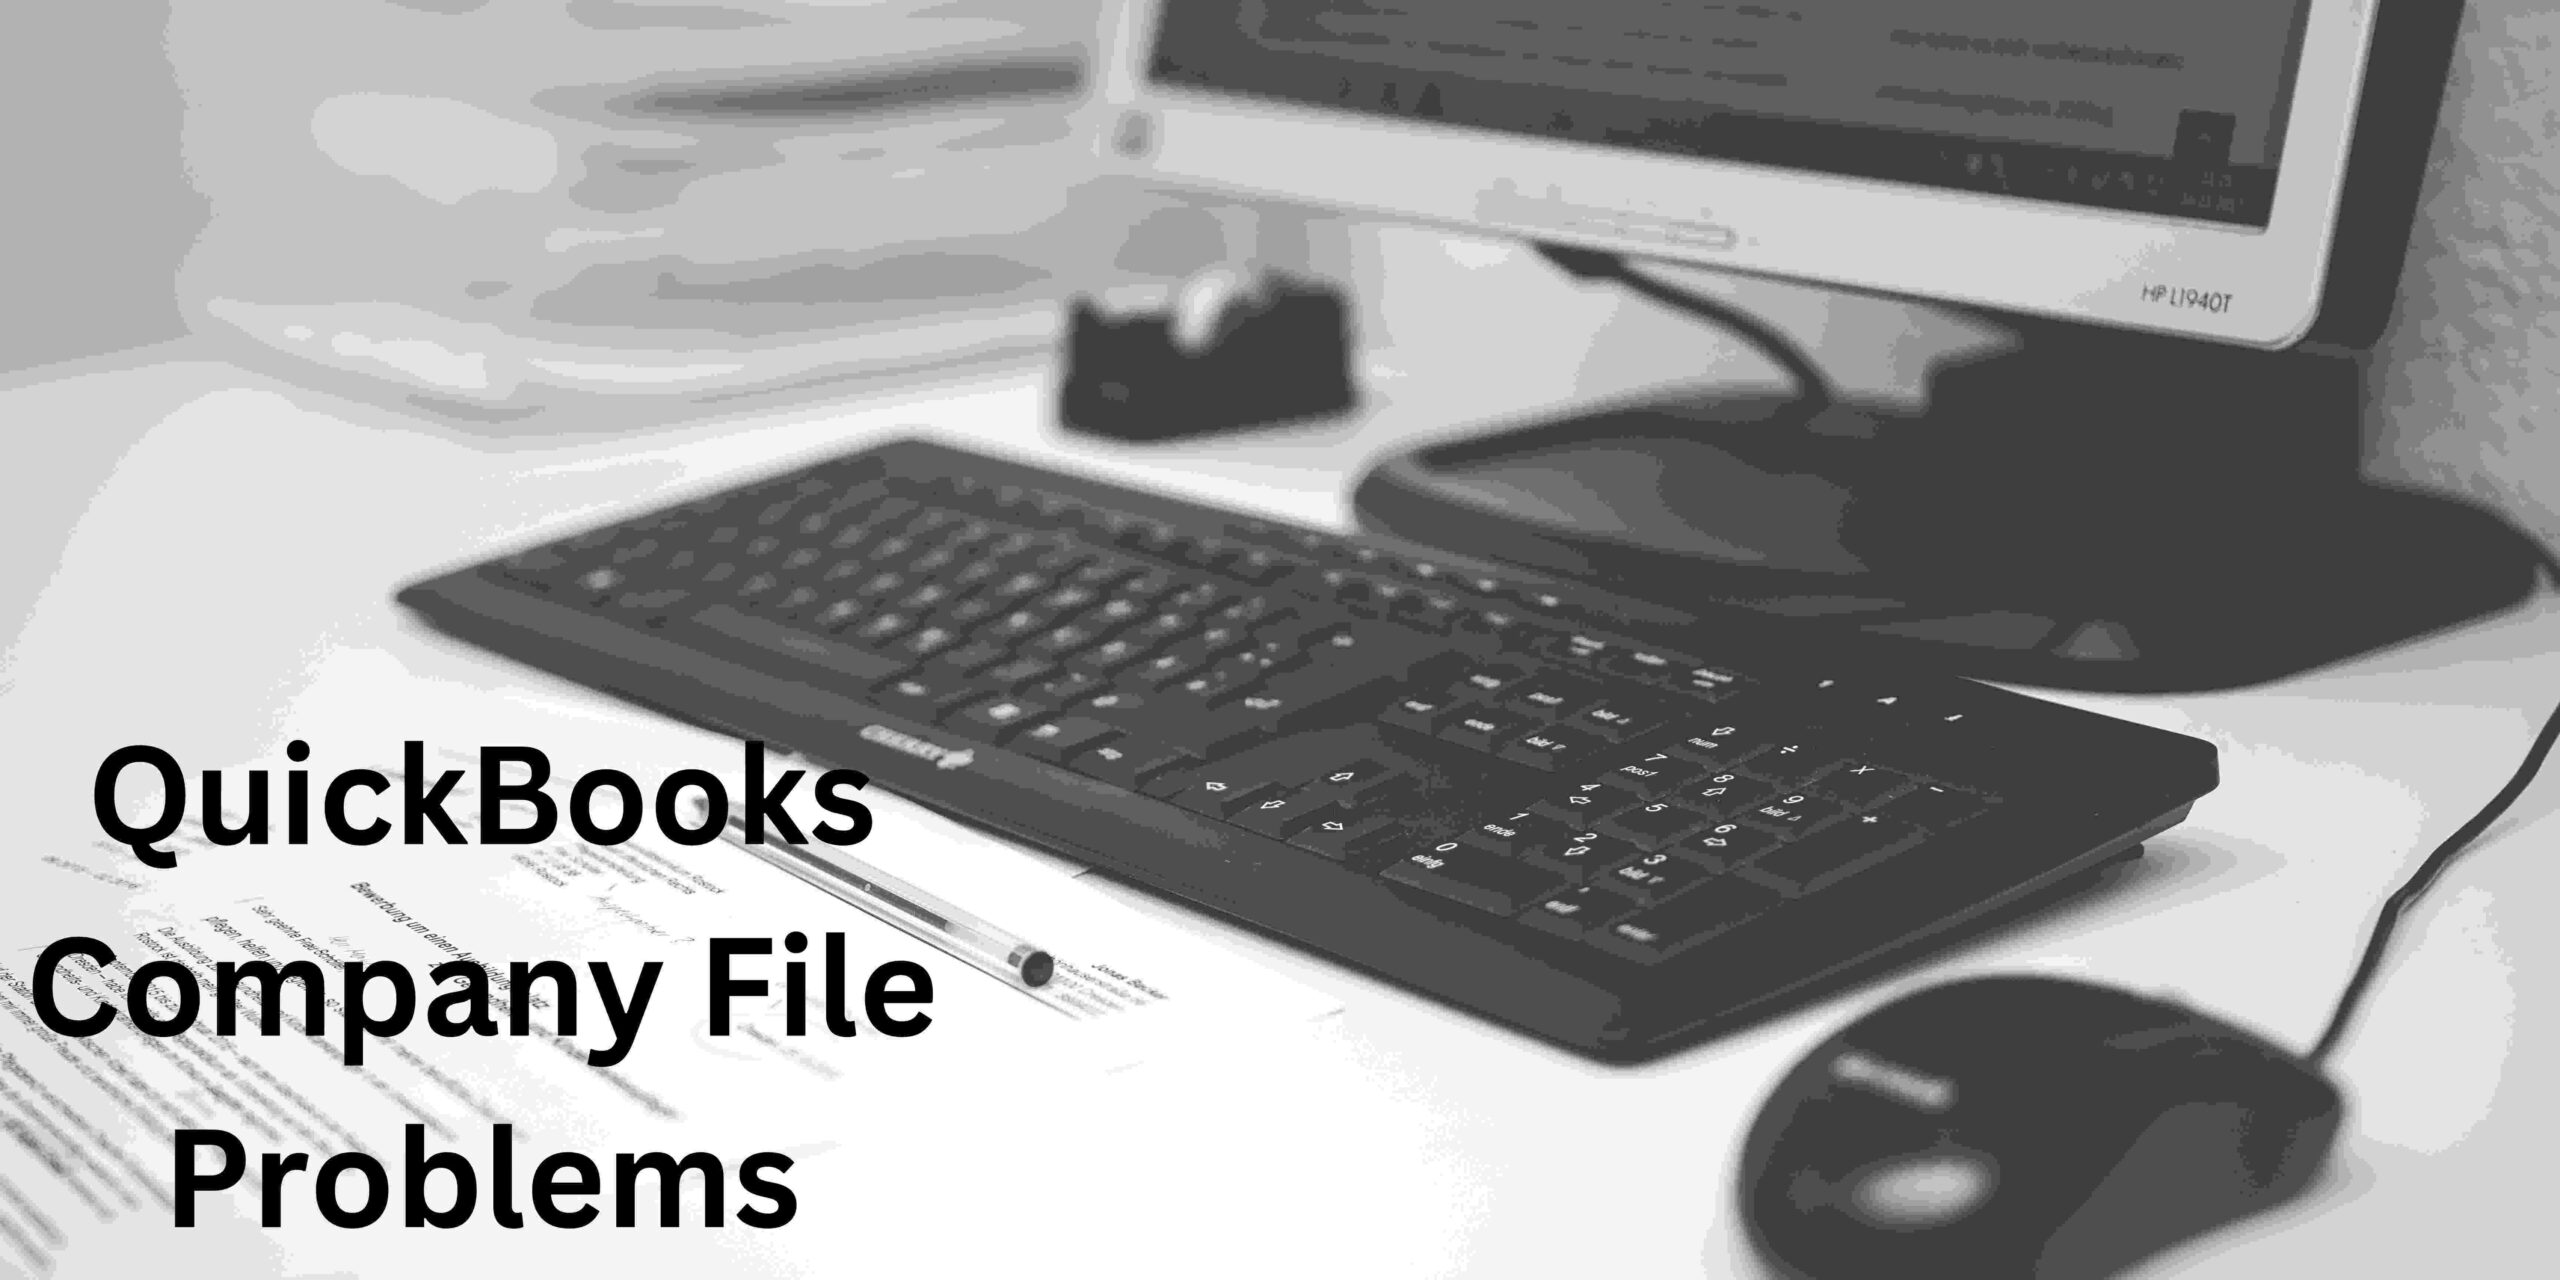 QuickBooks is unable to back up the company file